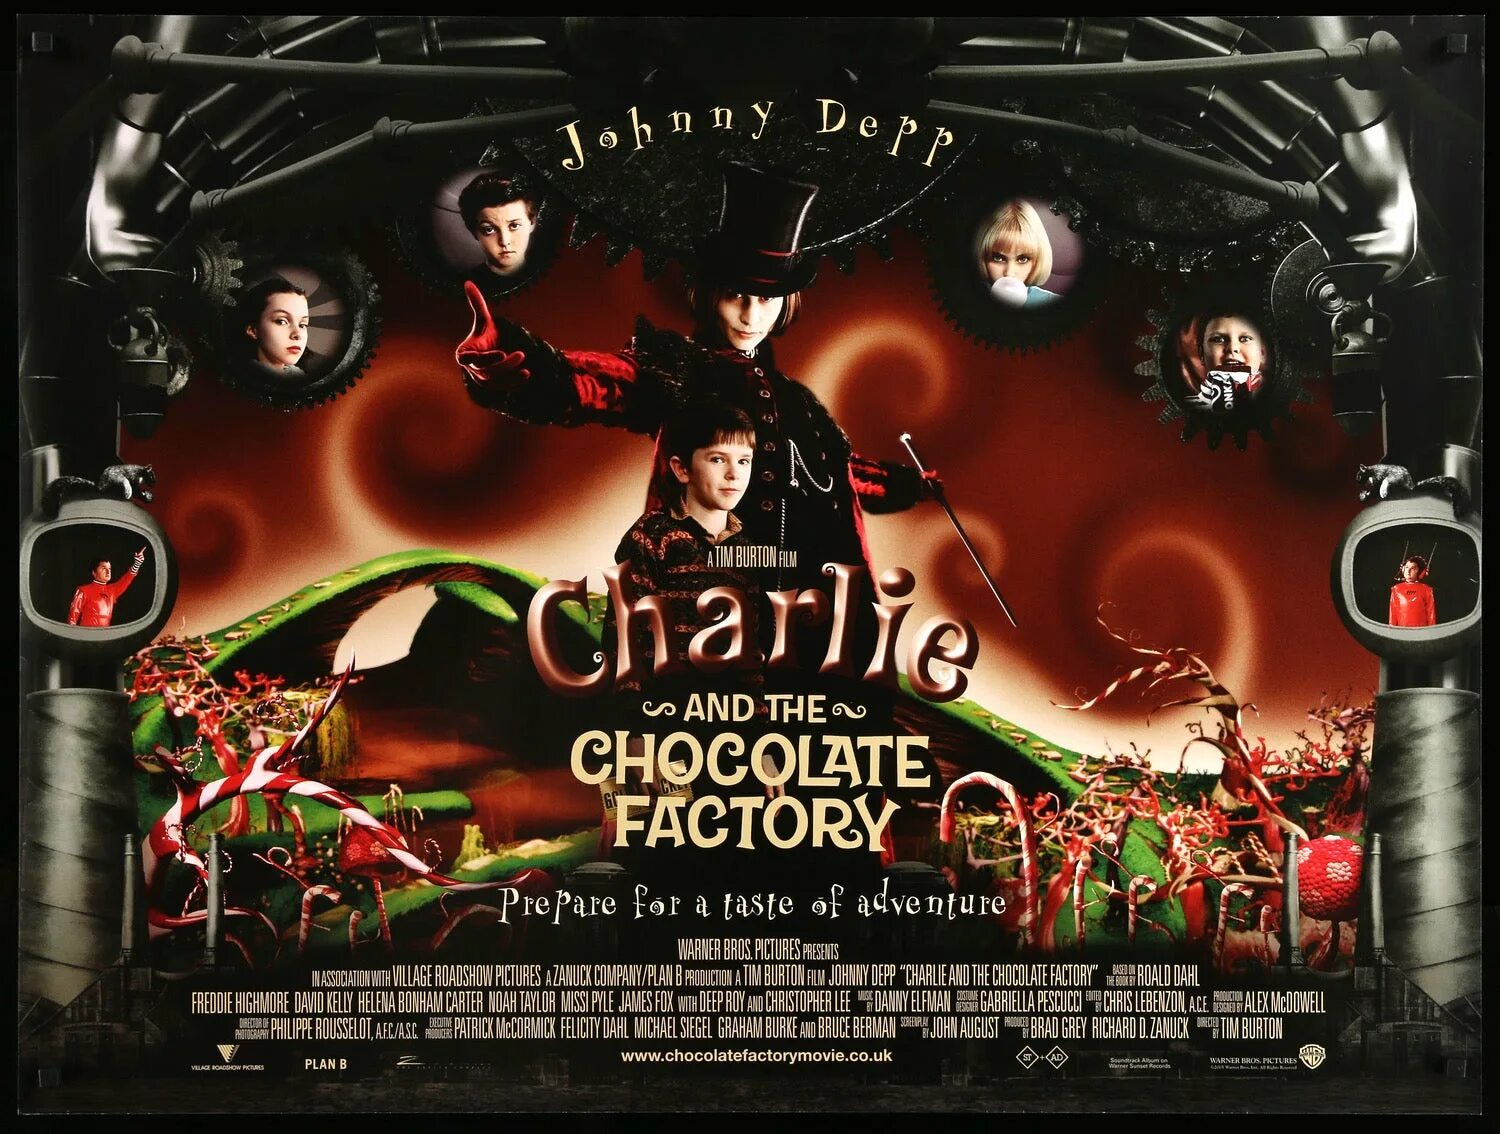 Charlie and the Chocolate Factory 2005 poster. Charlie and the Chocolate Factory Постер. Charlie and the Chocolate Factory 2005 обложка. Чарли и шоколадная фабрика афиша. Музыка шоколадная фабрика